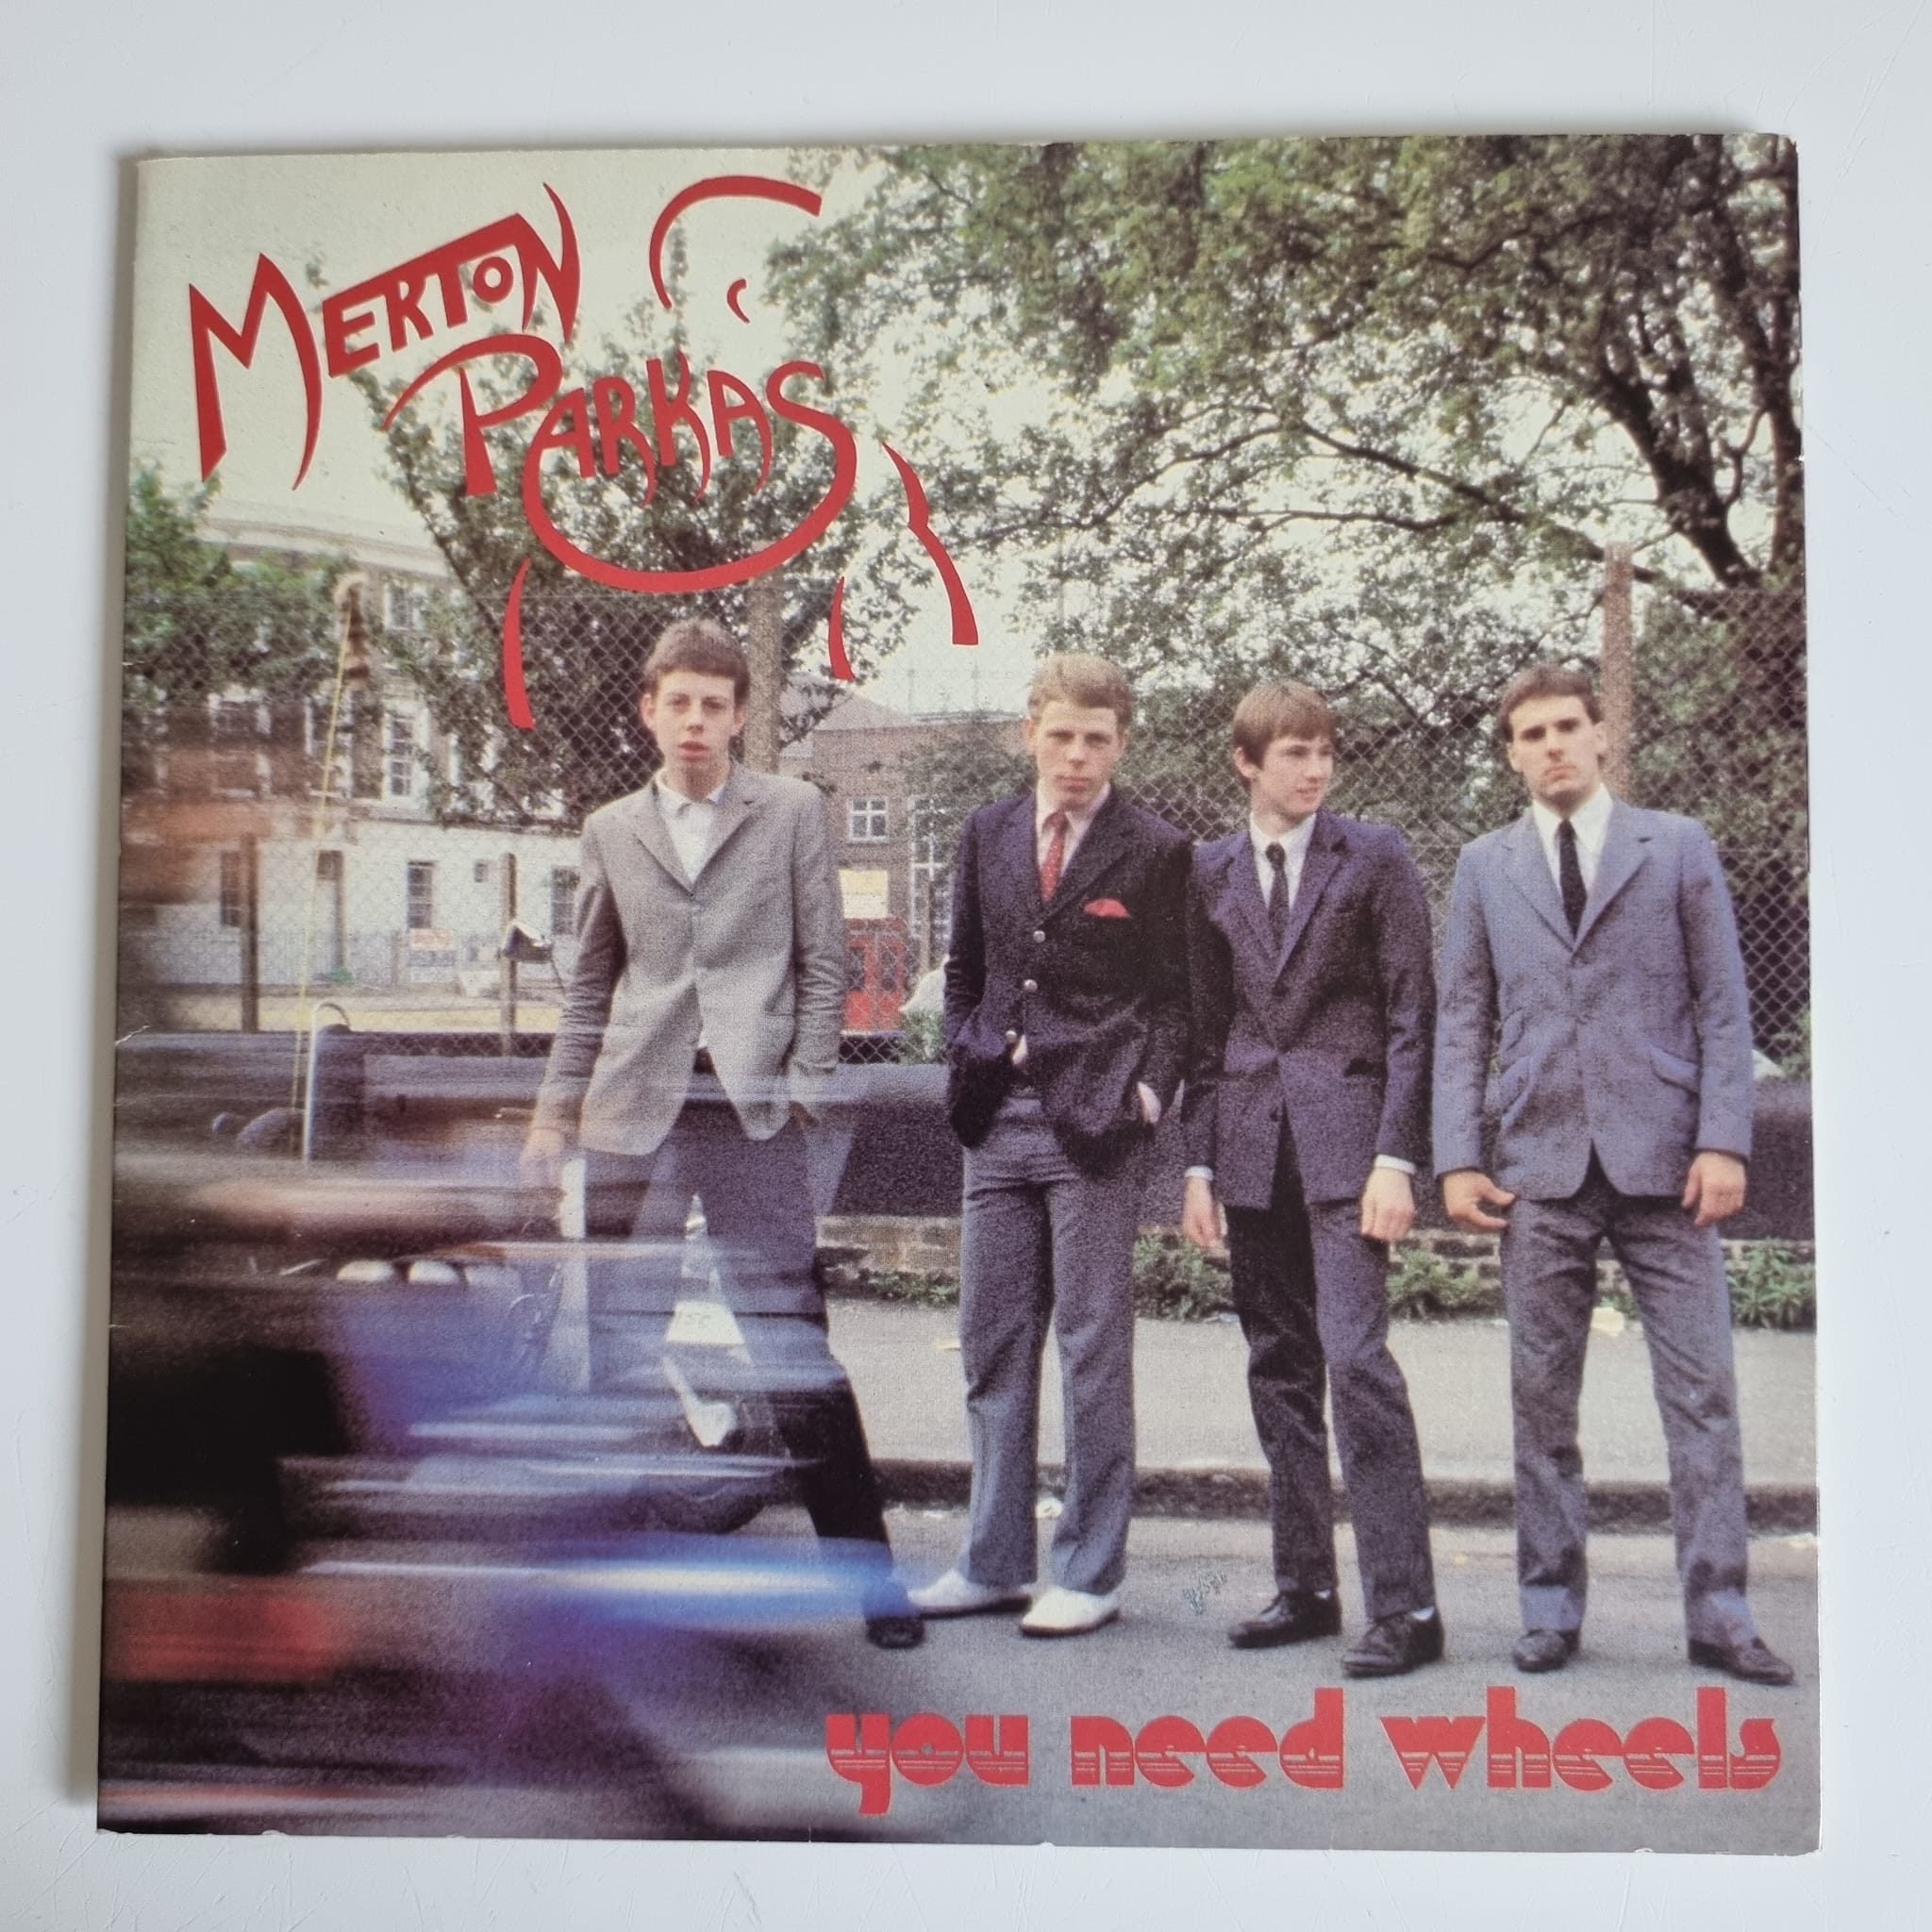 Buy this rare Merton Parkas record by clicking here